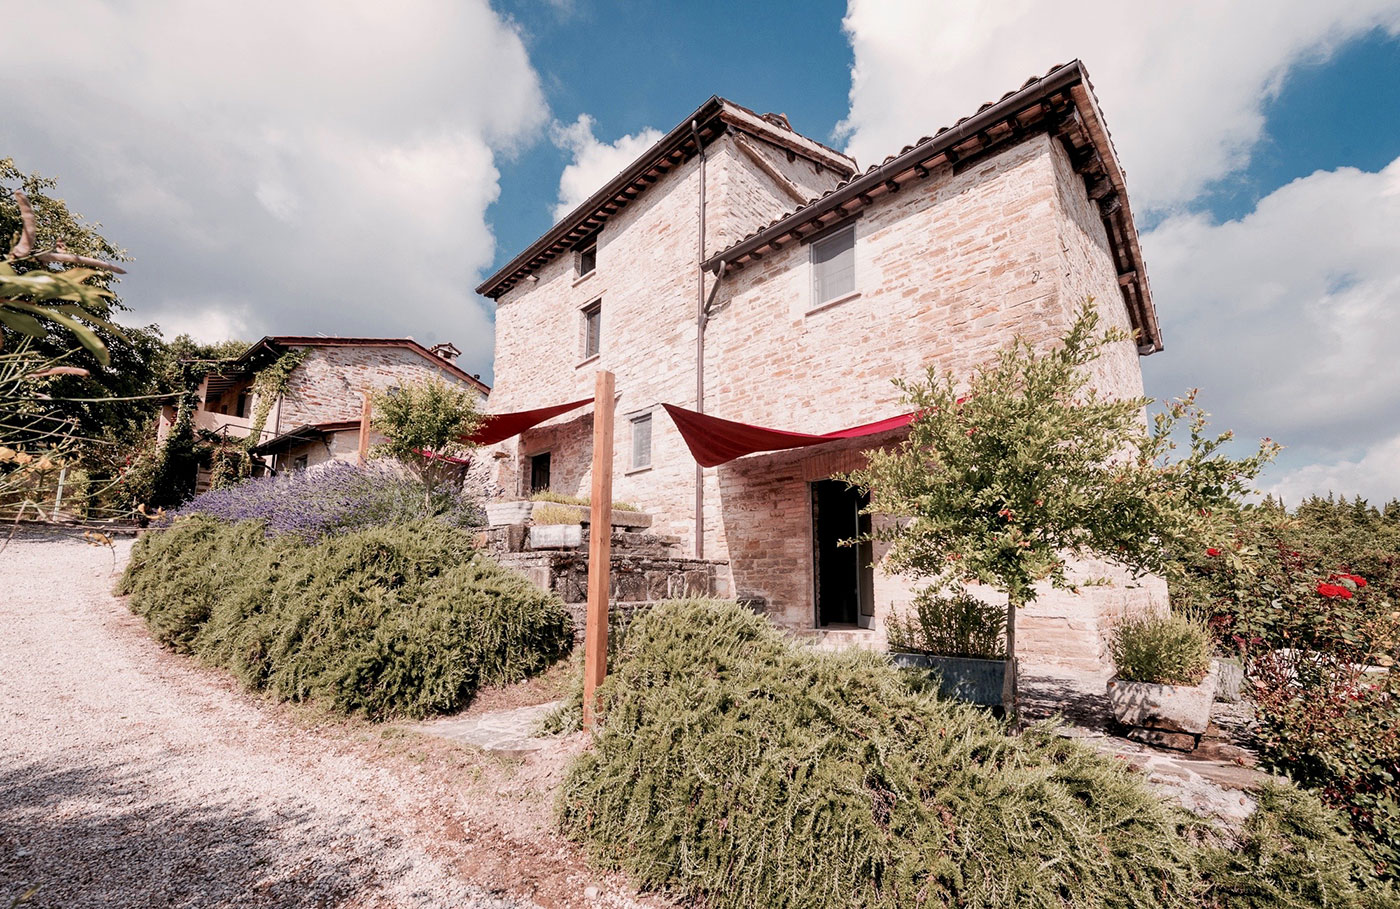 Casa Minotti: A Pinnacle of Romance in the Heart of Italy